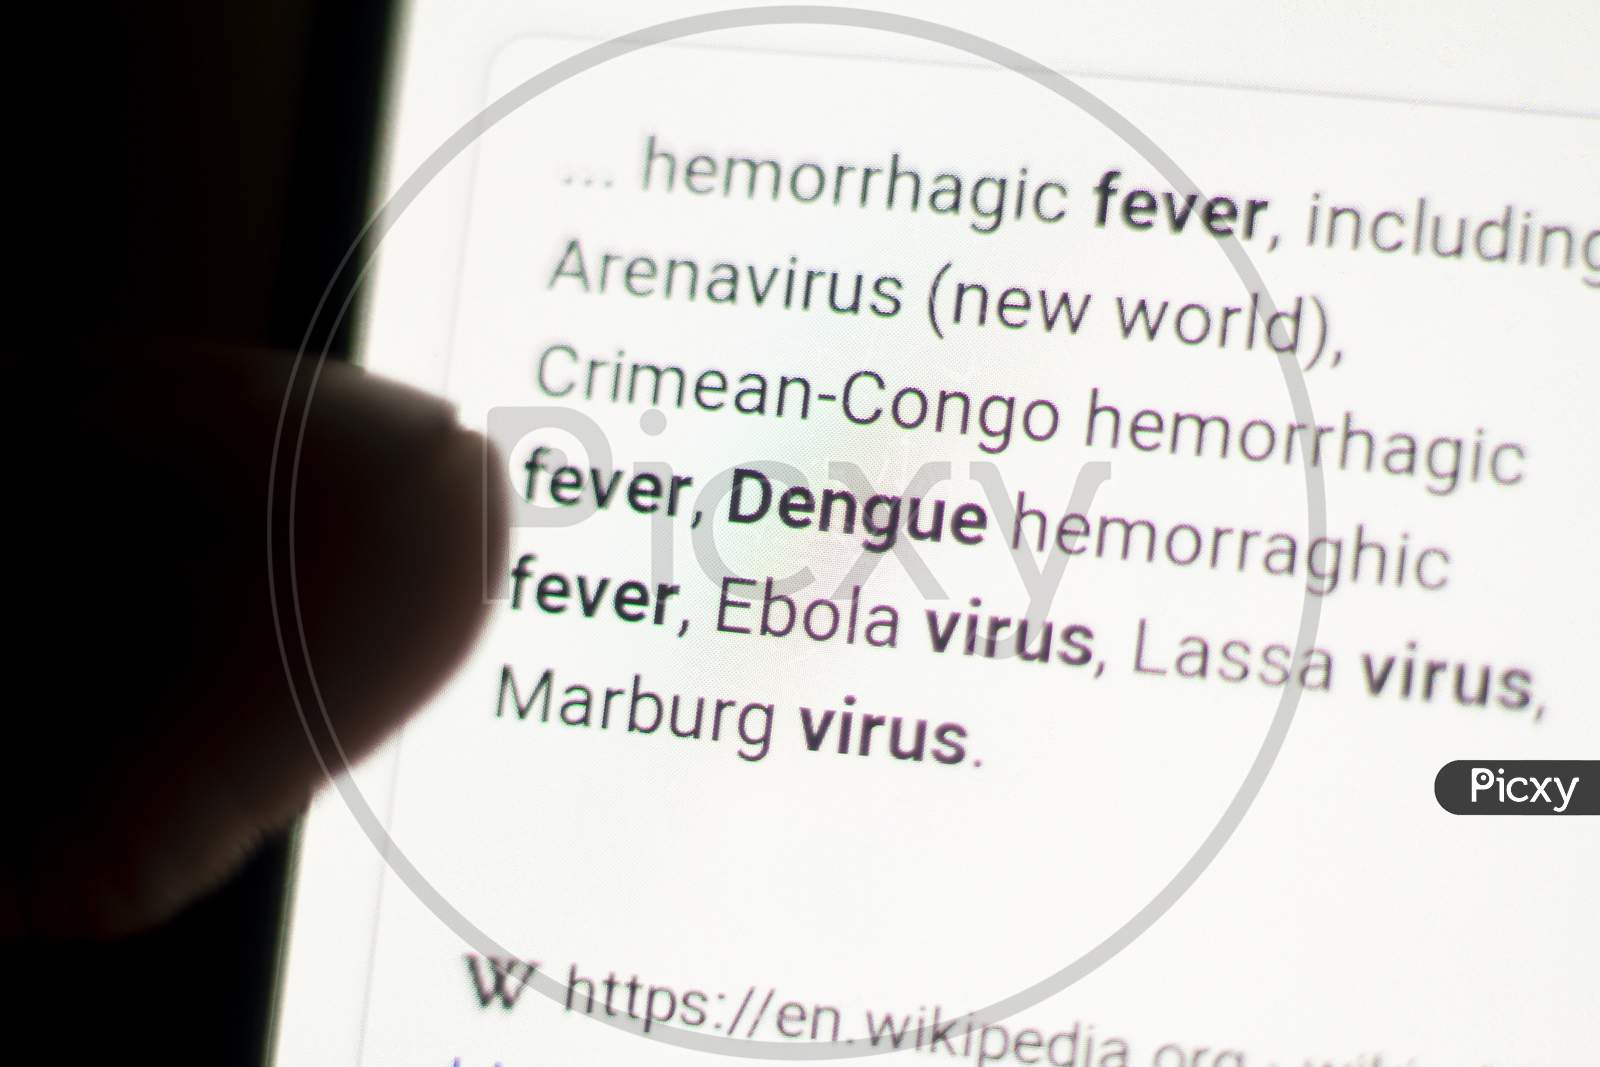 Dengue News On The Phone.Mobile Phone In Hands. Selective Focus And Chromatic Aberration Effects.